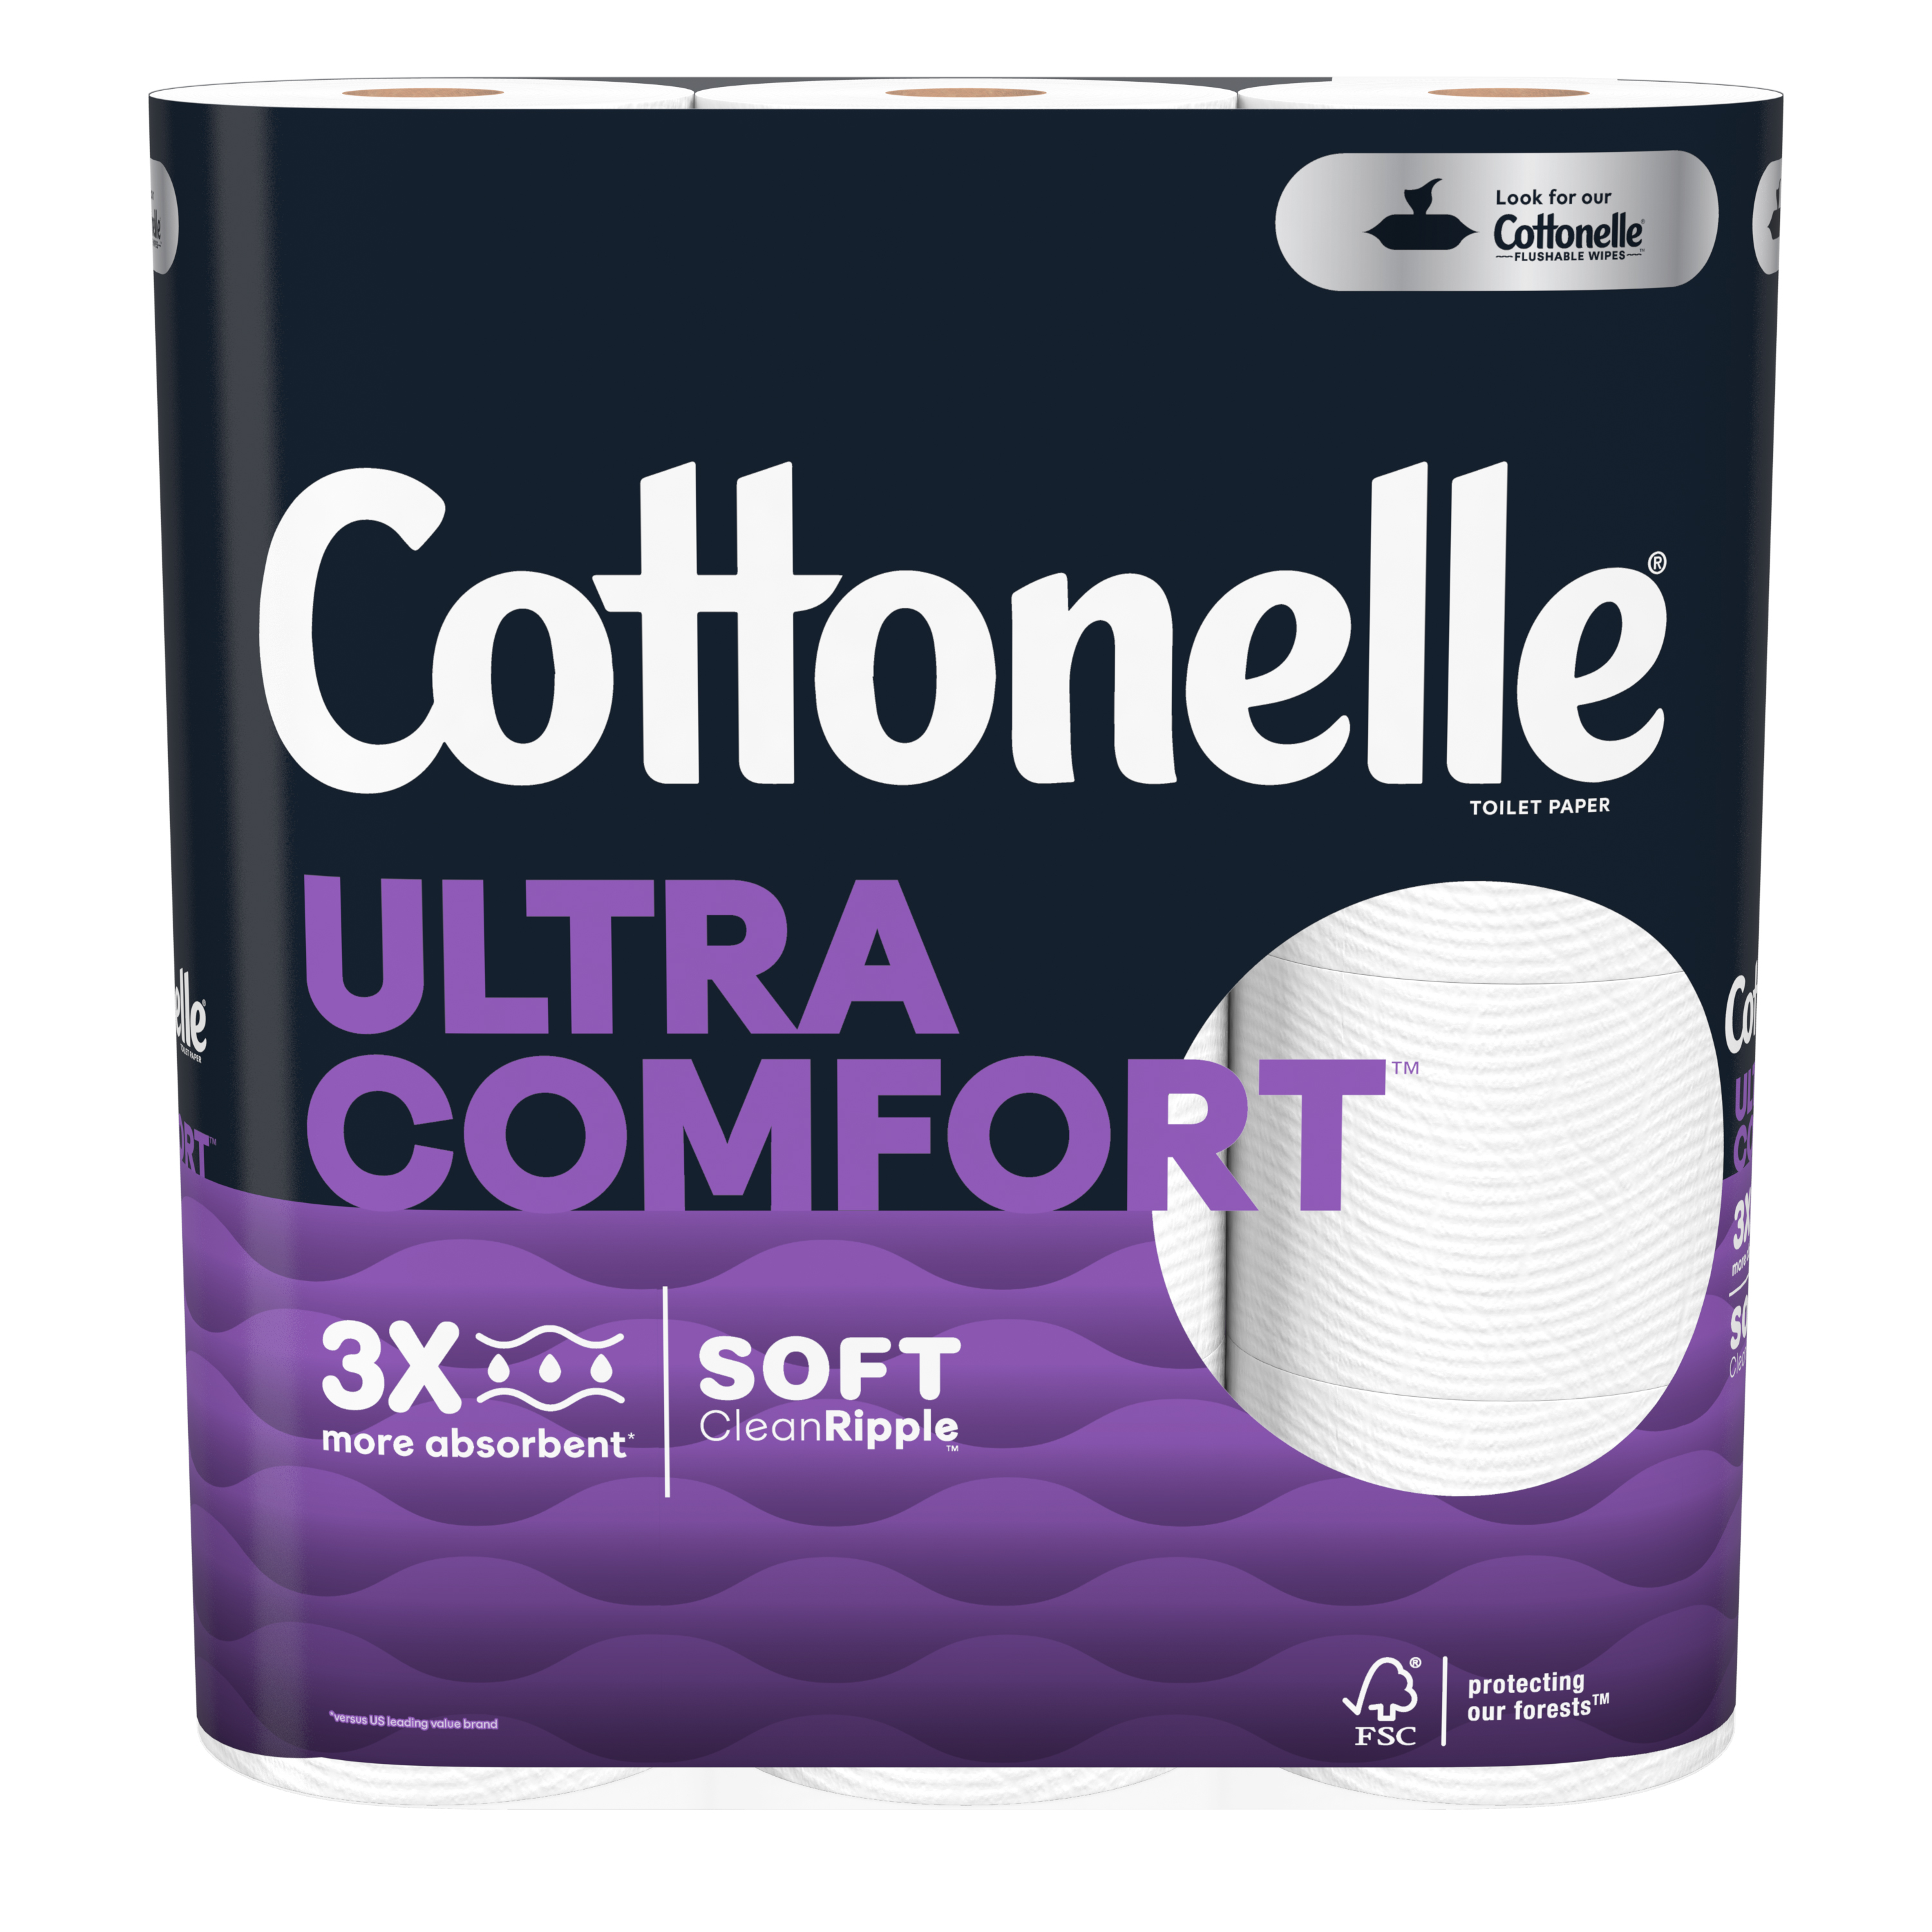 https://www.kimberly-clark.com/-/media/kimberly/images/ingredients/cottonelle/current-ultra-comfort.jpg?h=3000&w=3000&la=en-US&hash=E1ED63349B4A66ACFA671989D79FC509C861A409